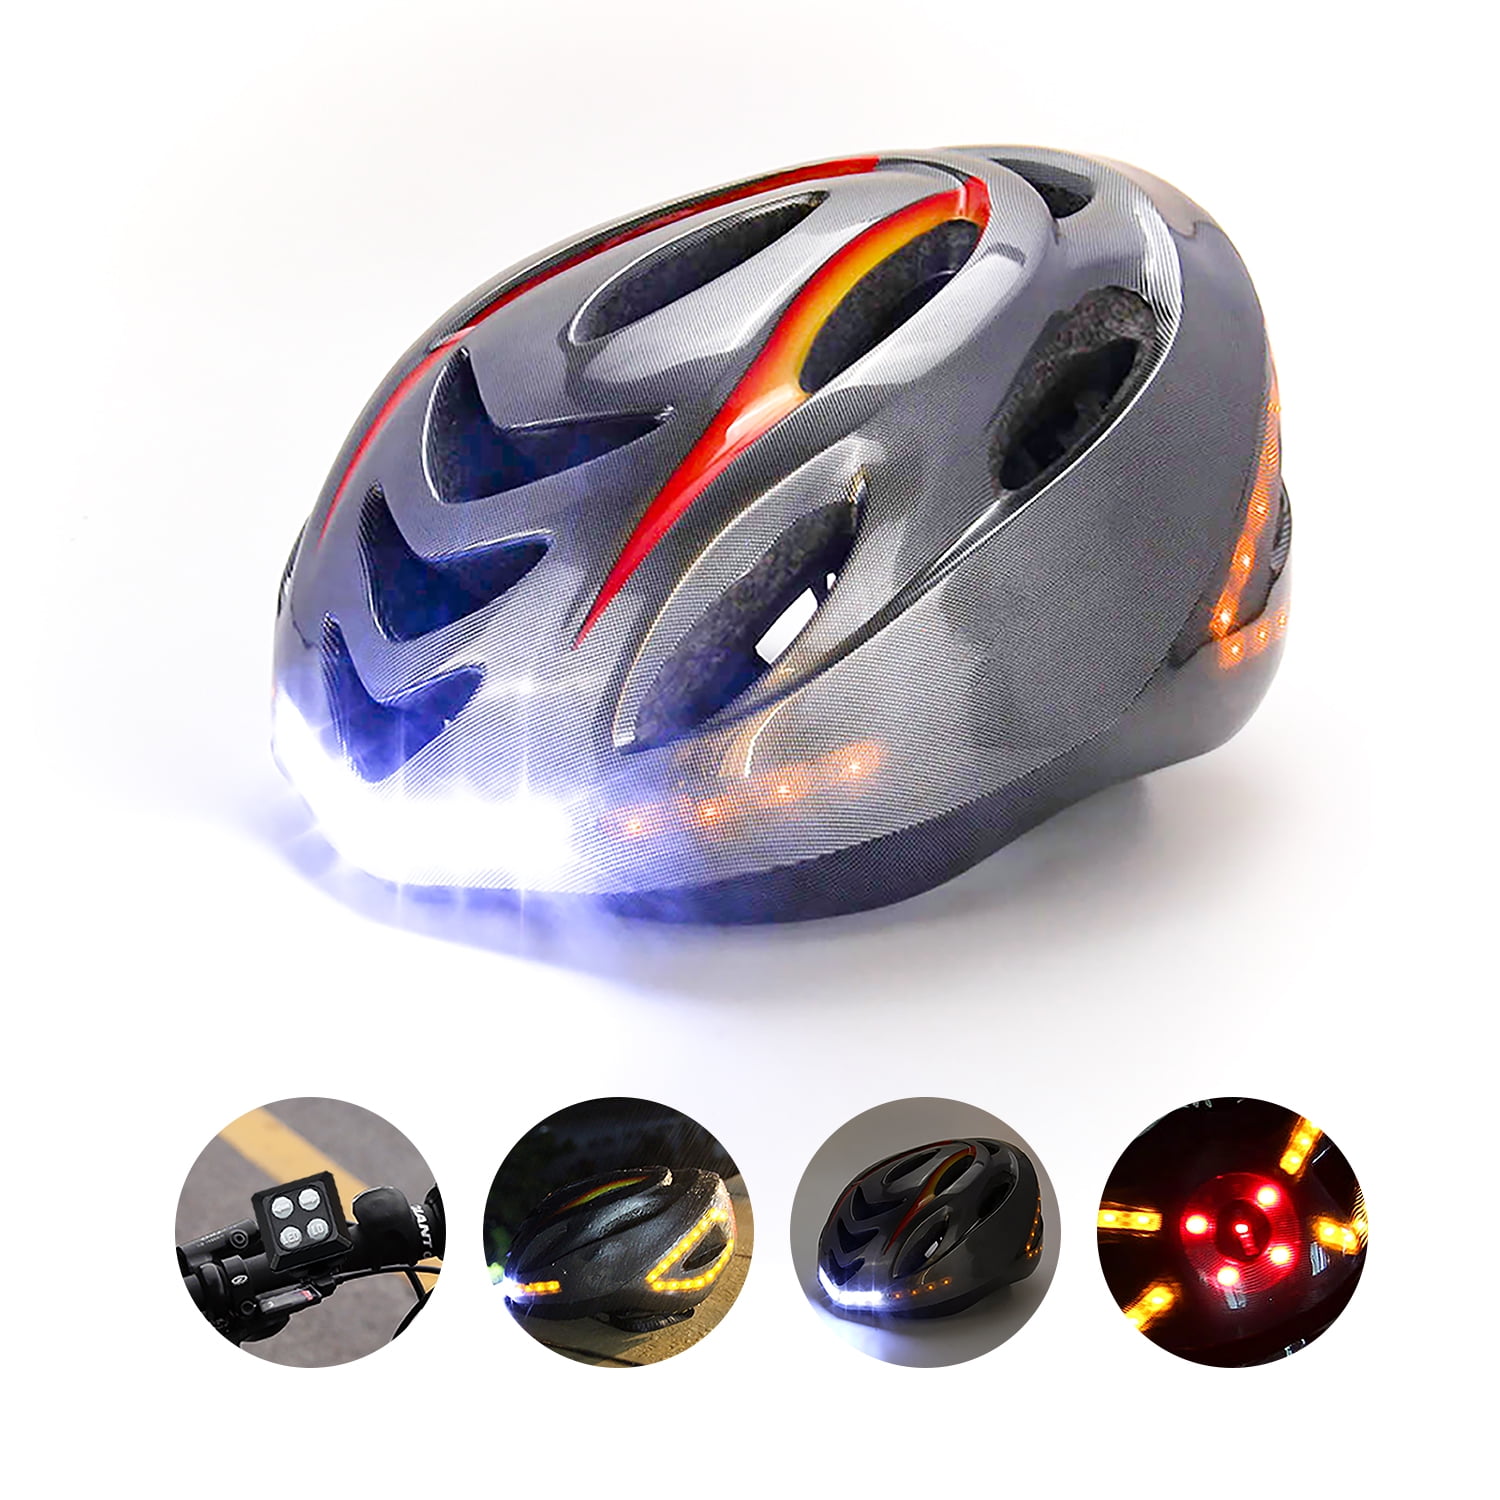 3 Mode Motorcycle Bicycle Helmet Night Light Strip Safety Signal LED USB Charger 